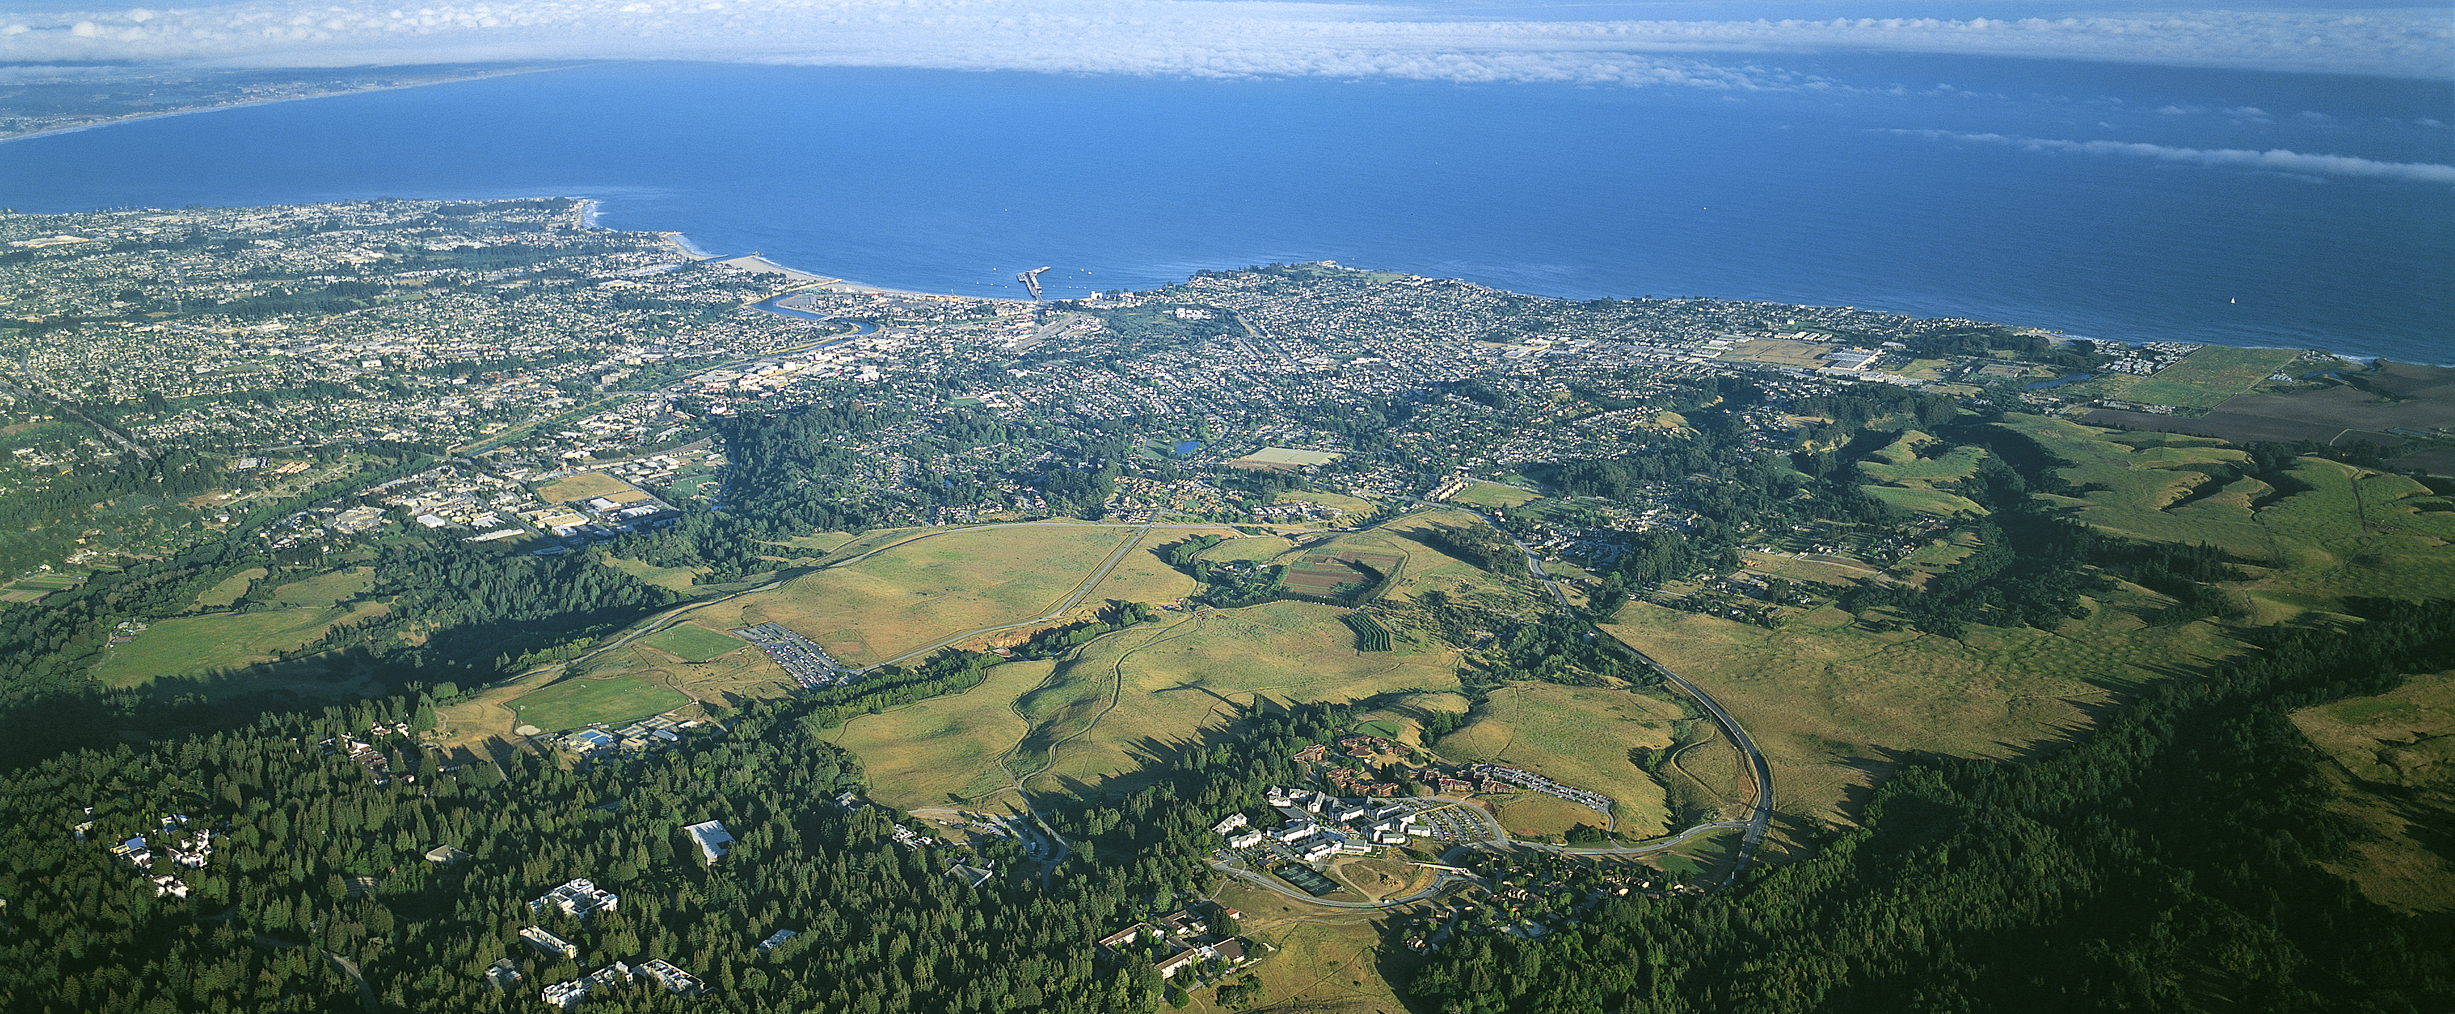 Aerial view of the campus and Monterey Bay